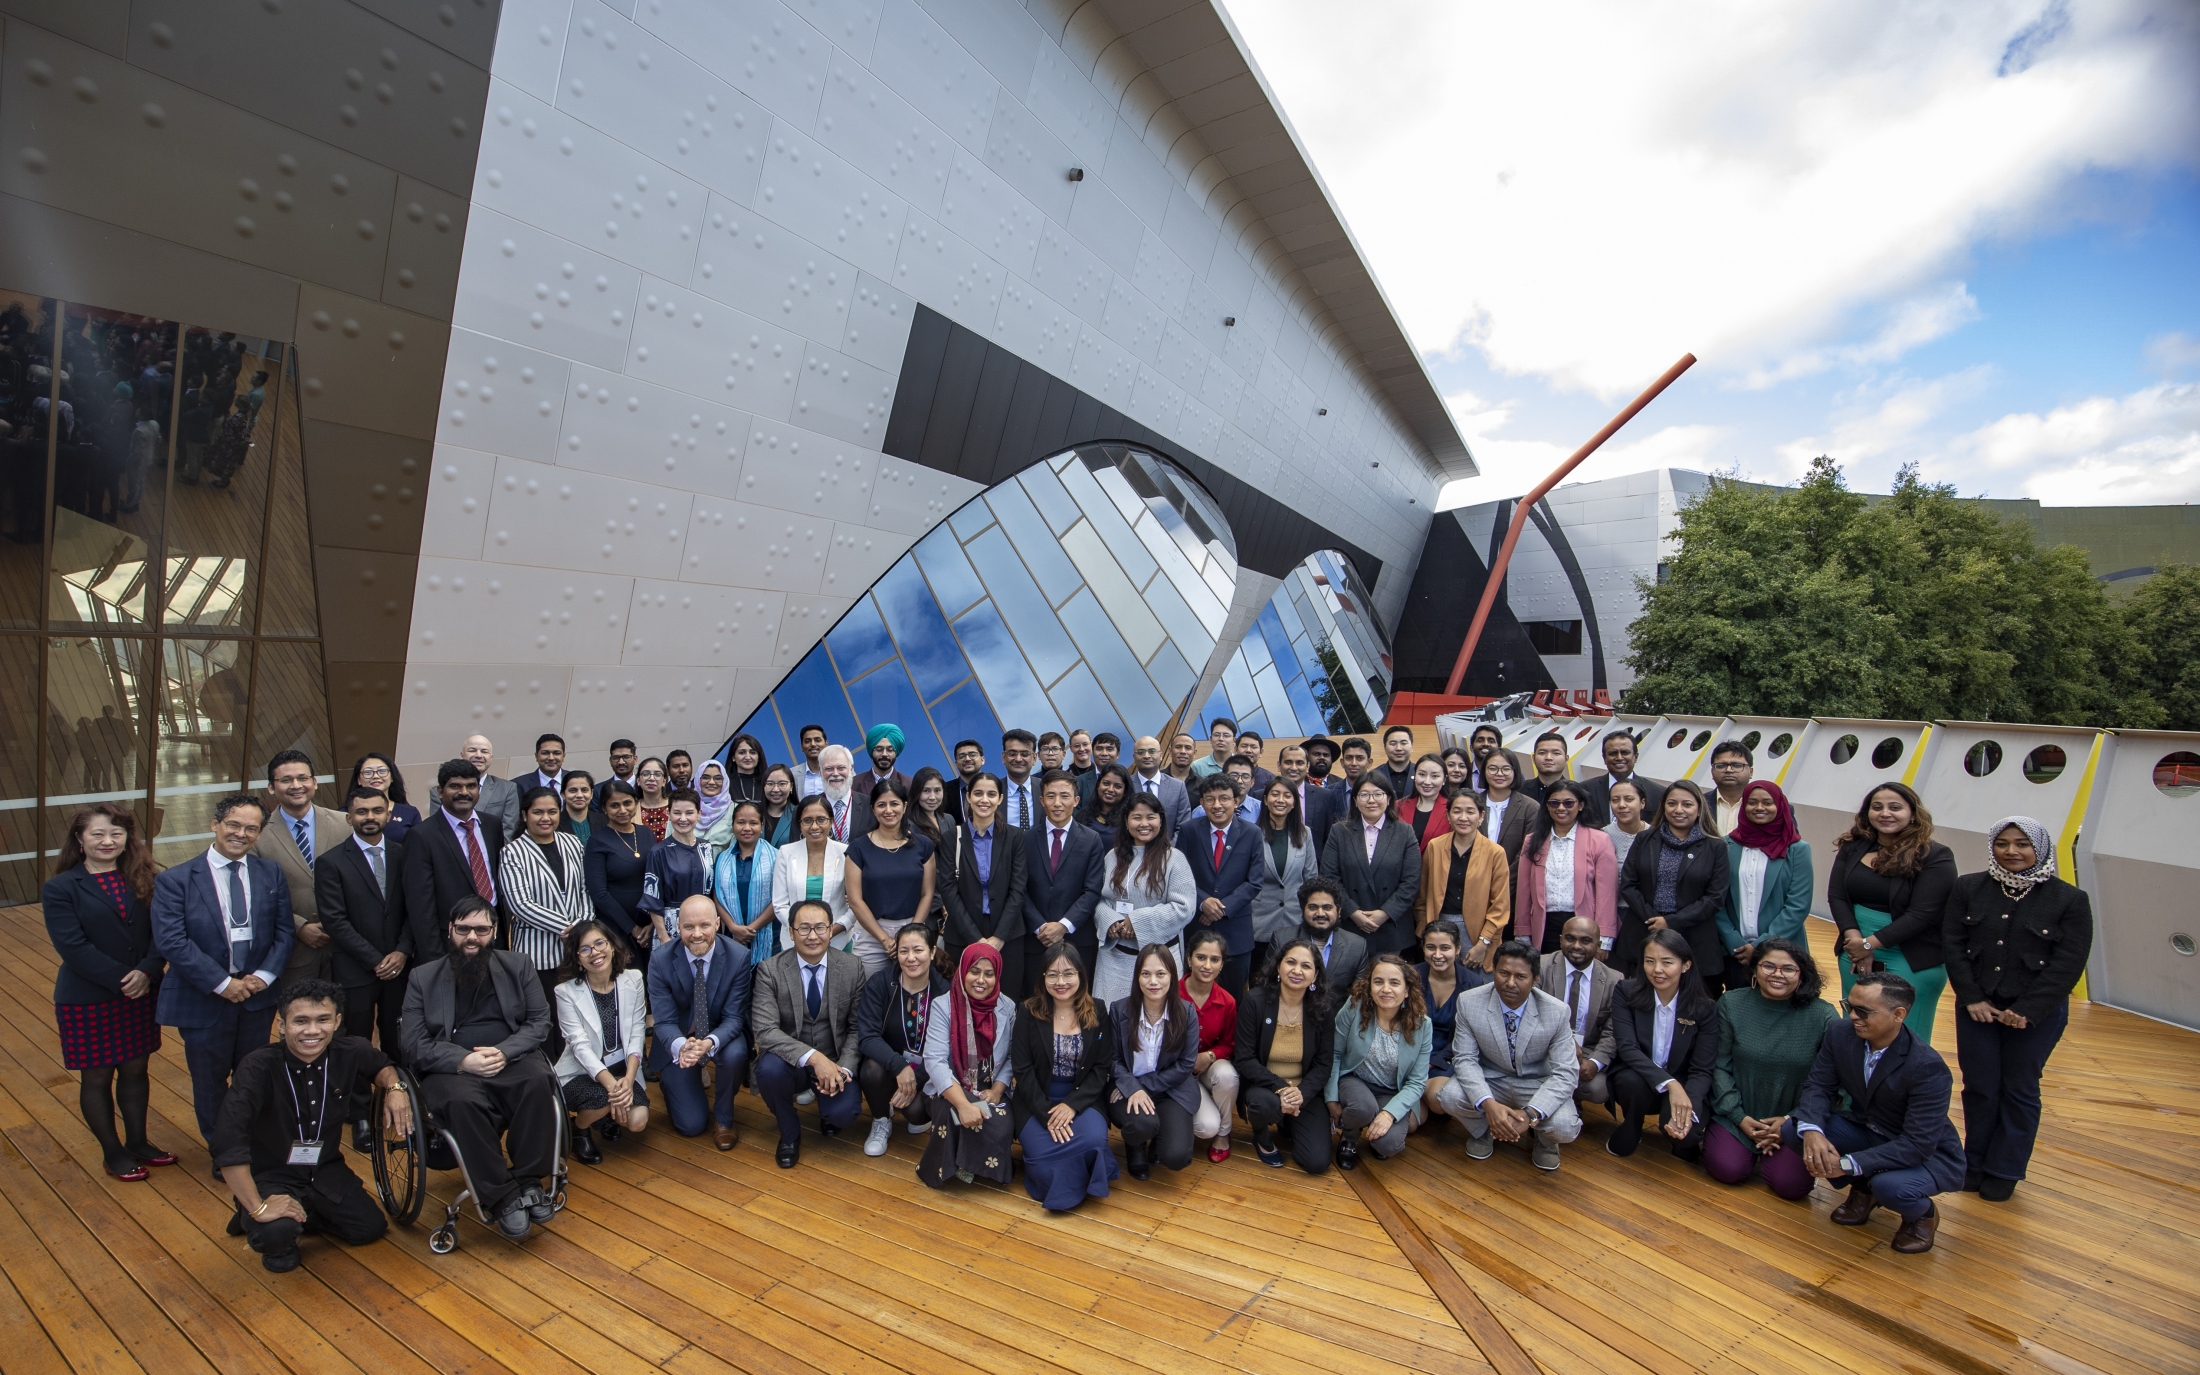 Scholars and officials pose at the opening of the workshop component of the Scholars Forum at the National Museum of Australia. 